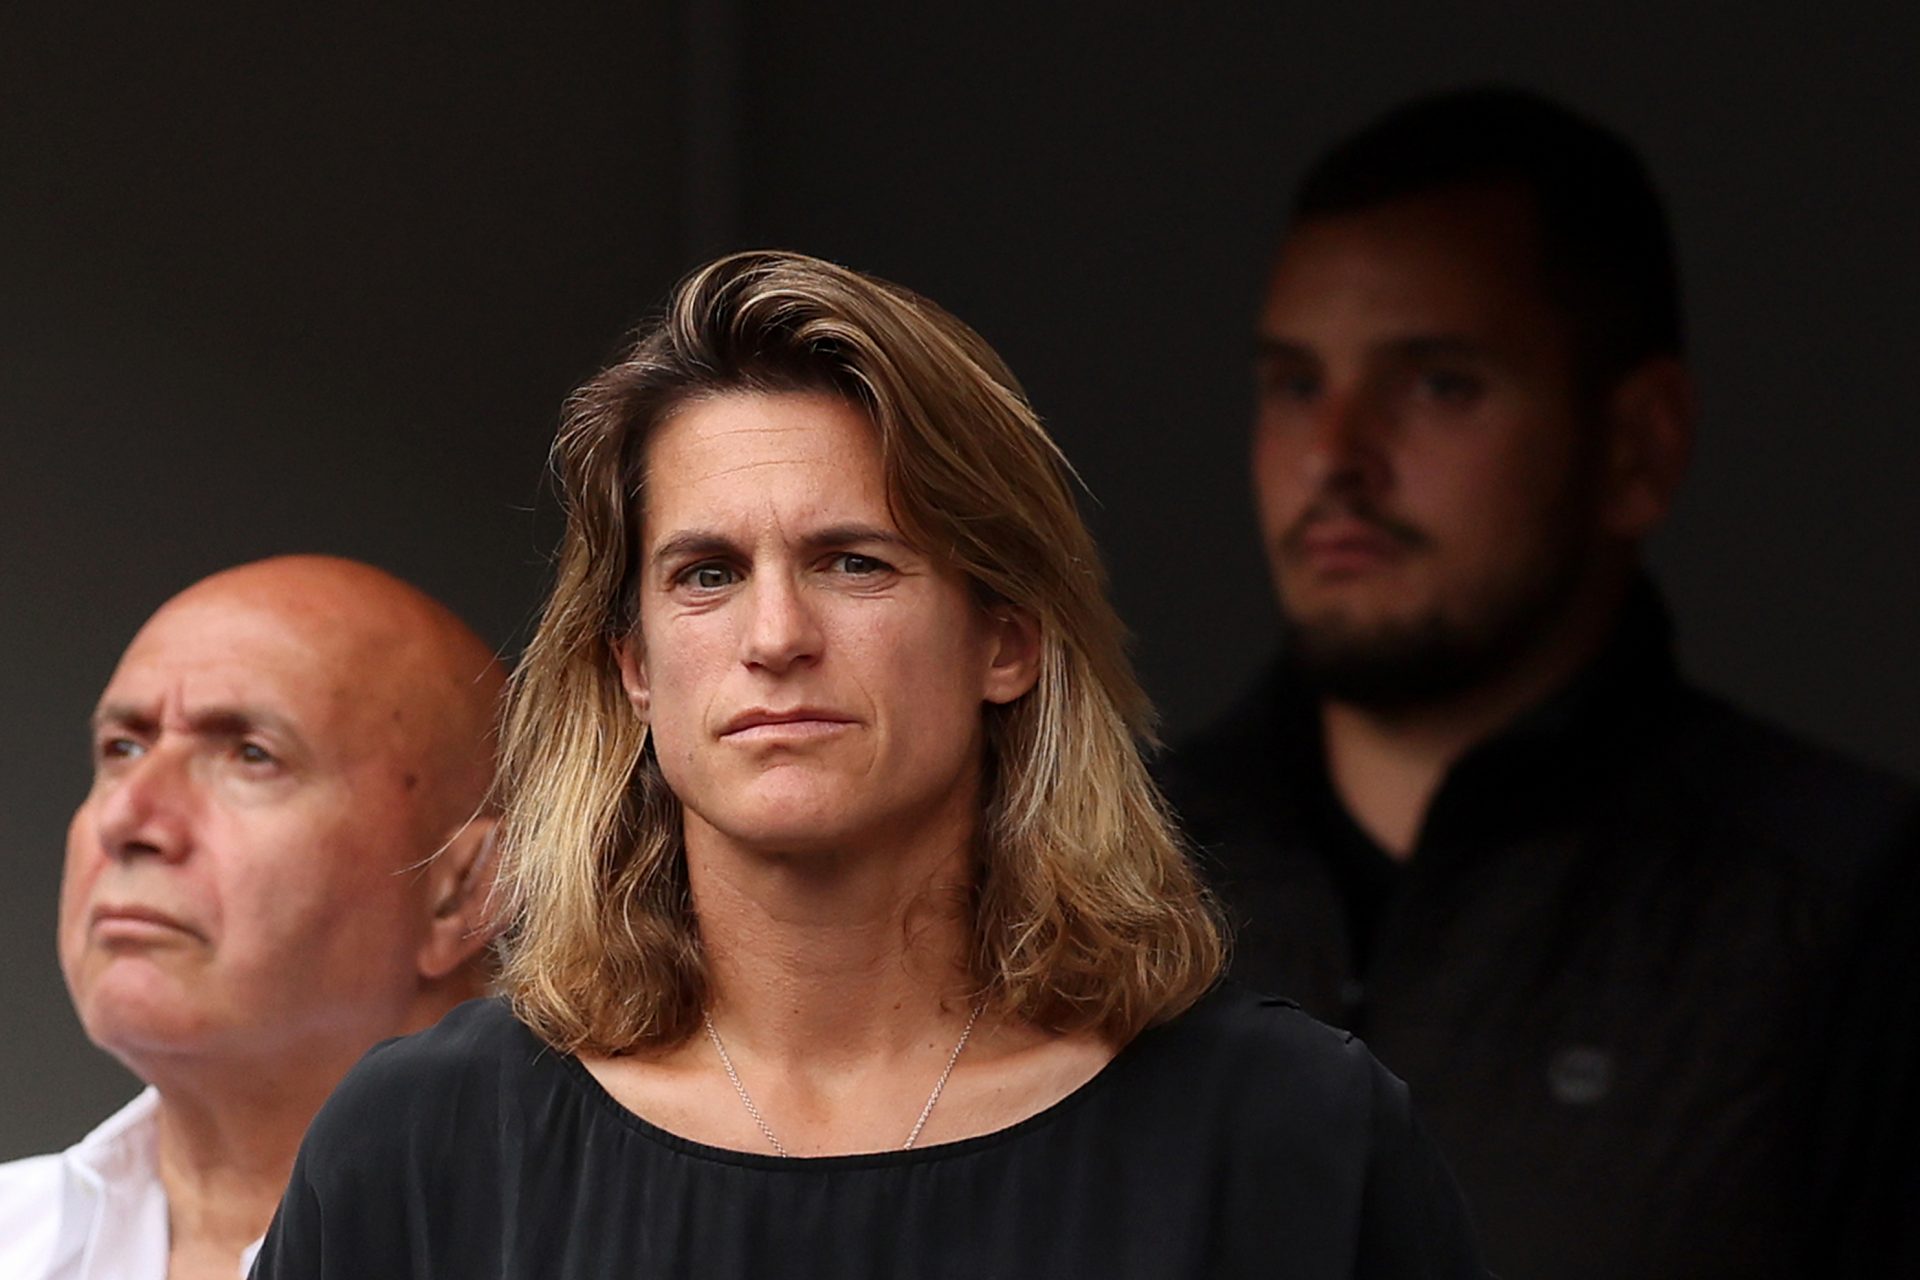 What happened to Mauresmo?